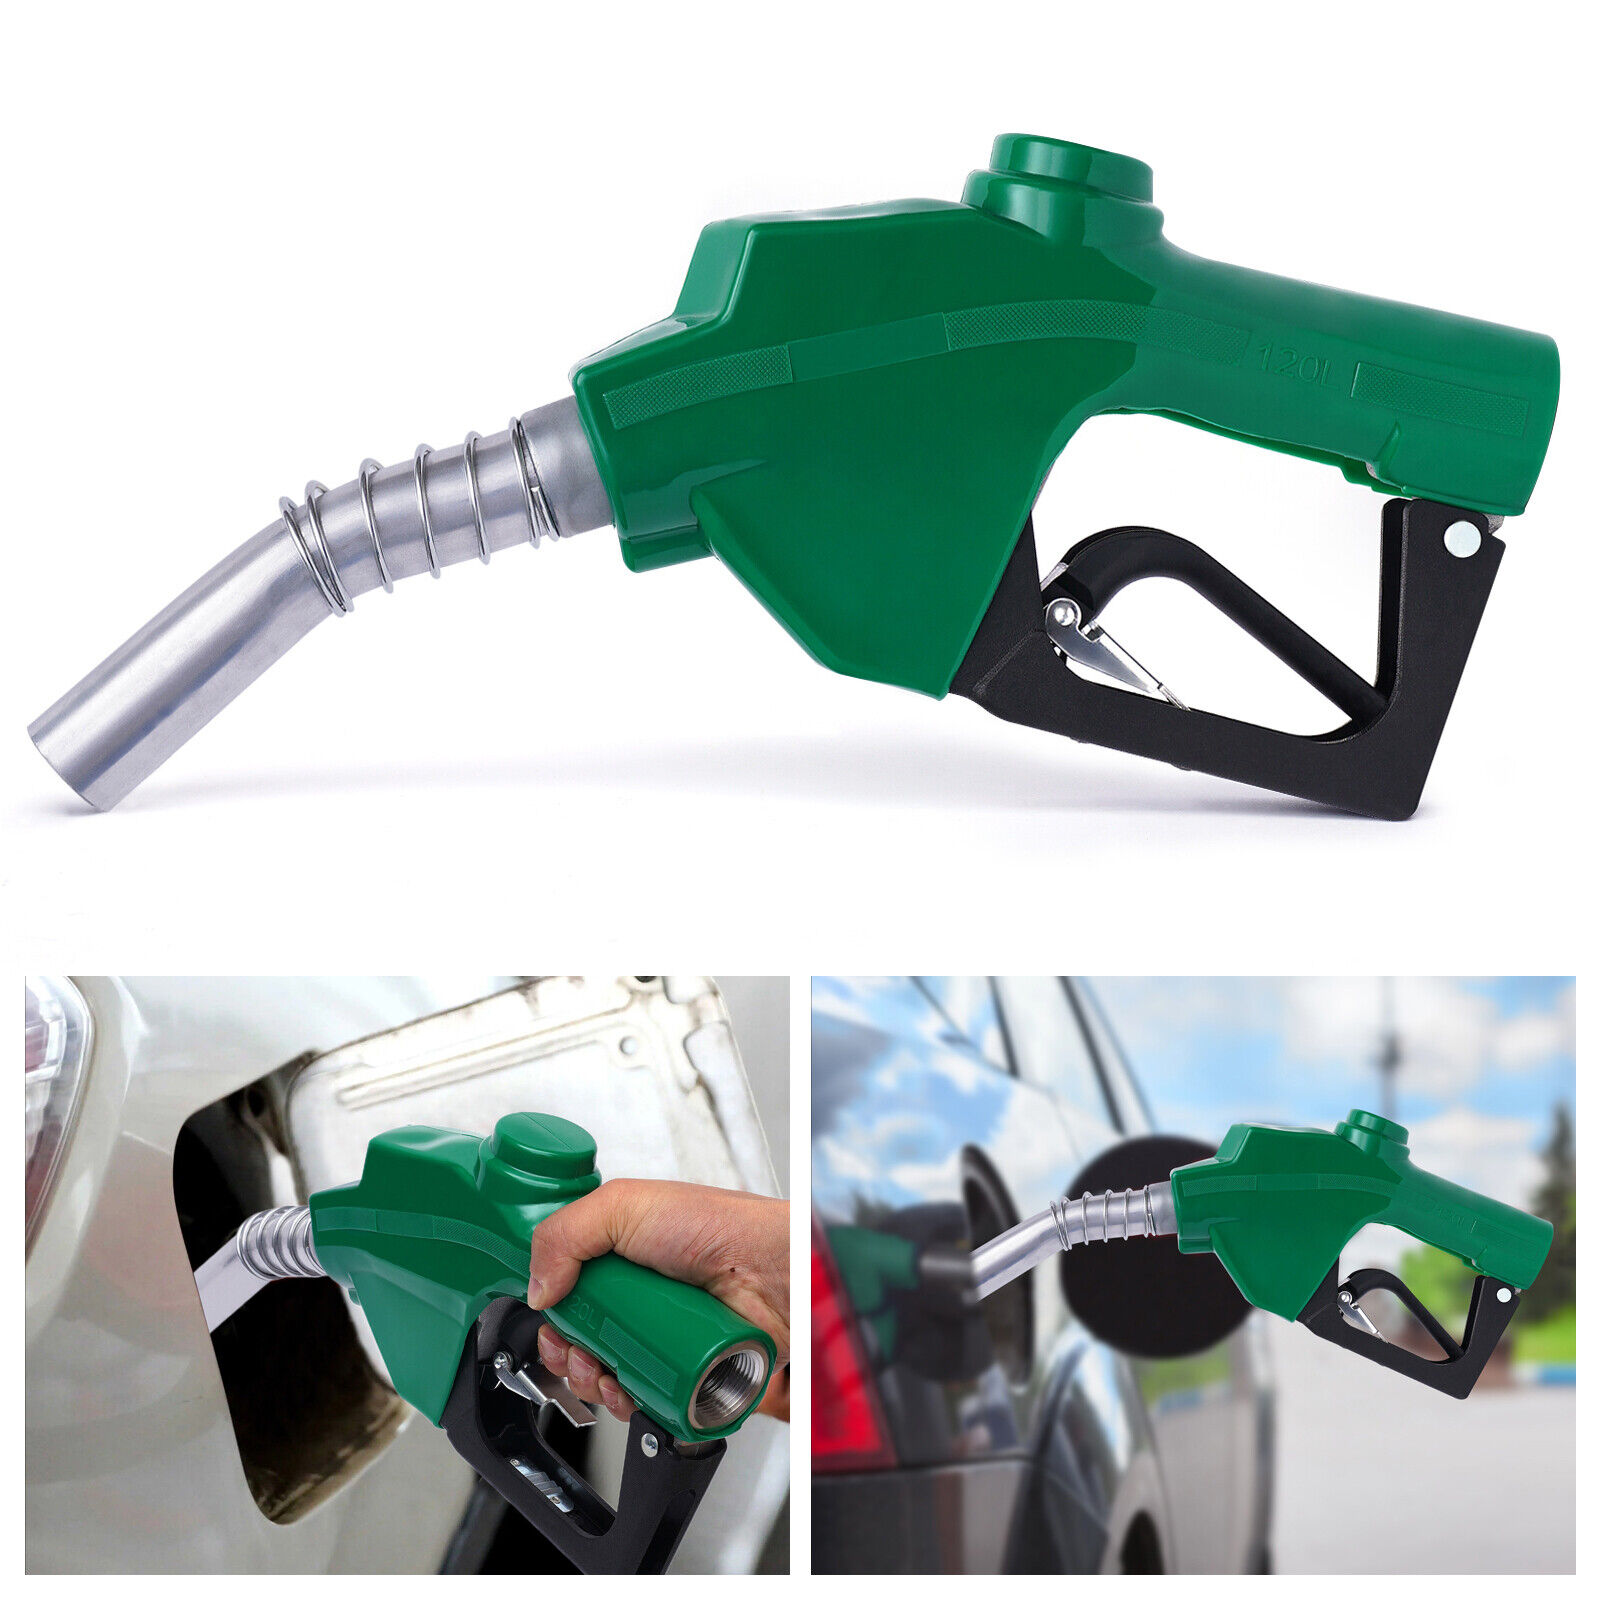 1 Inch Automatic Fuel Oil Pump Transfer Nozzle 7H Green Gas Refueling Tool - image 1 of 12